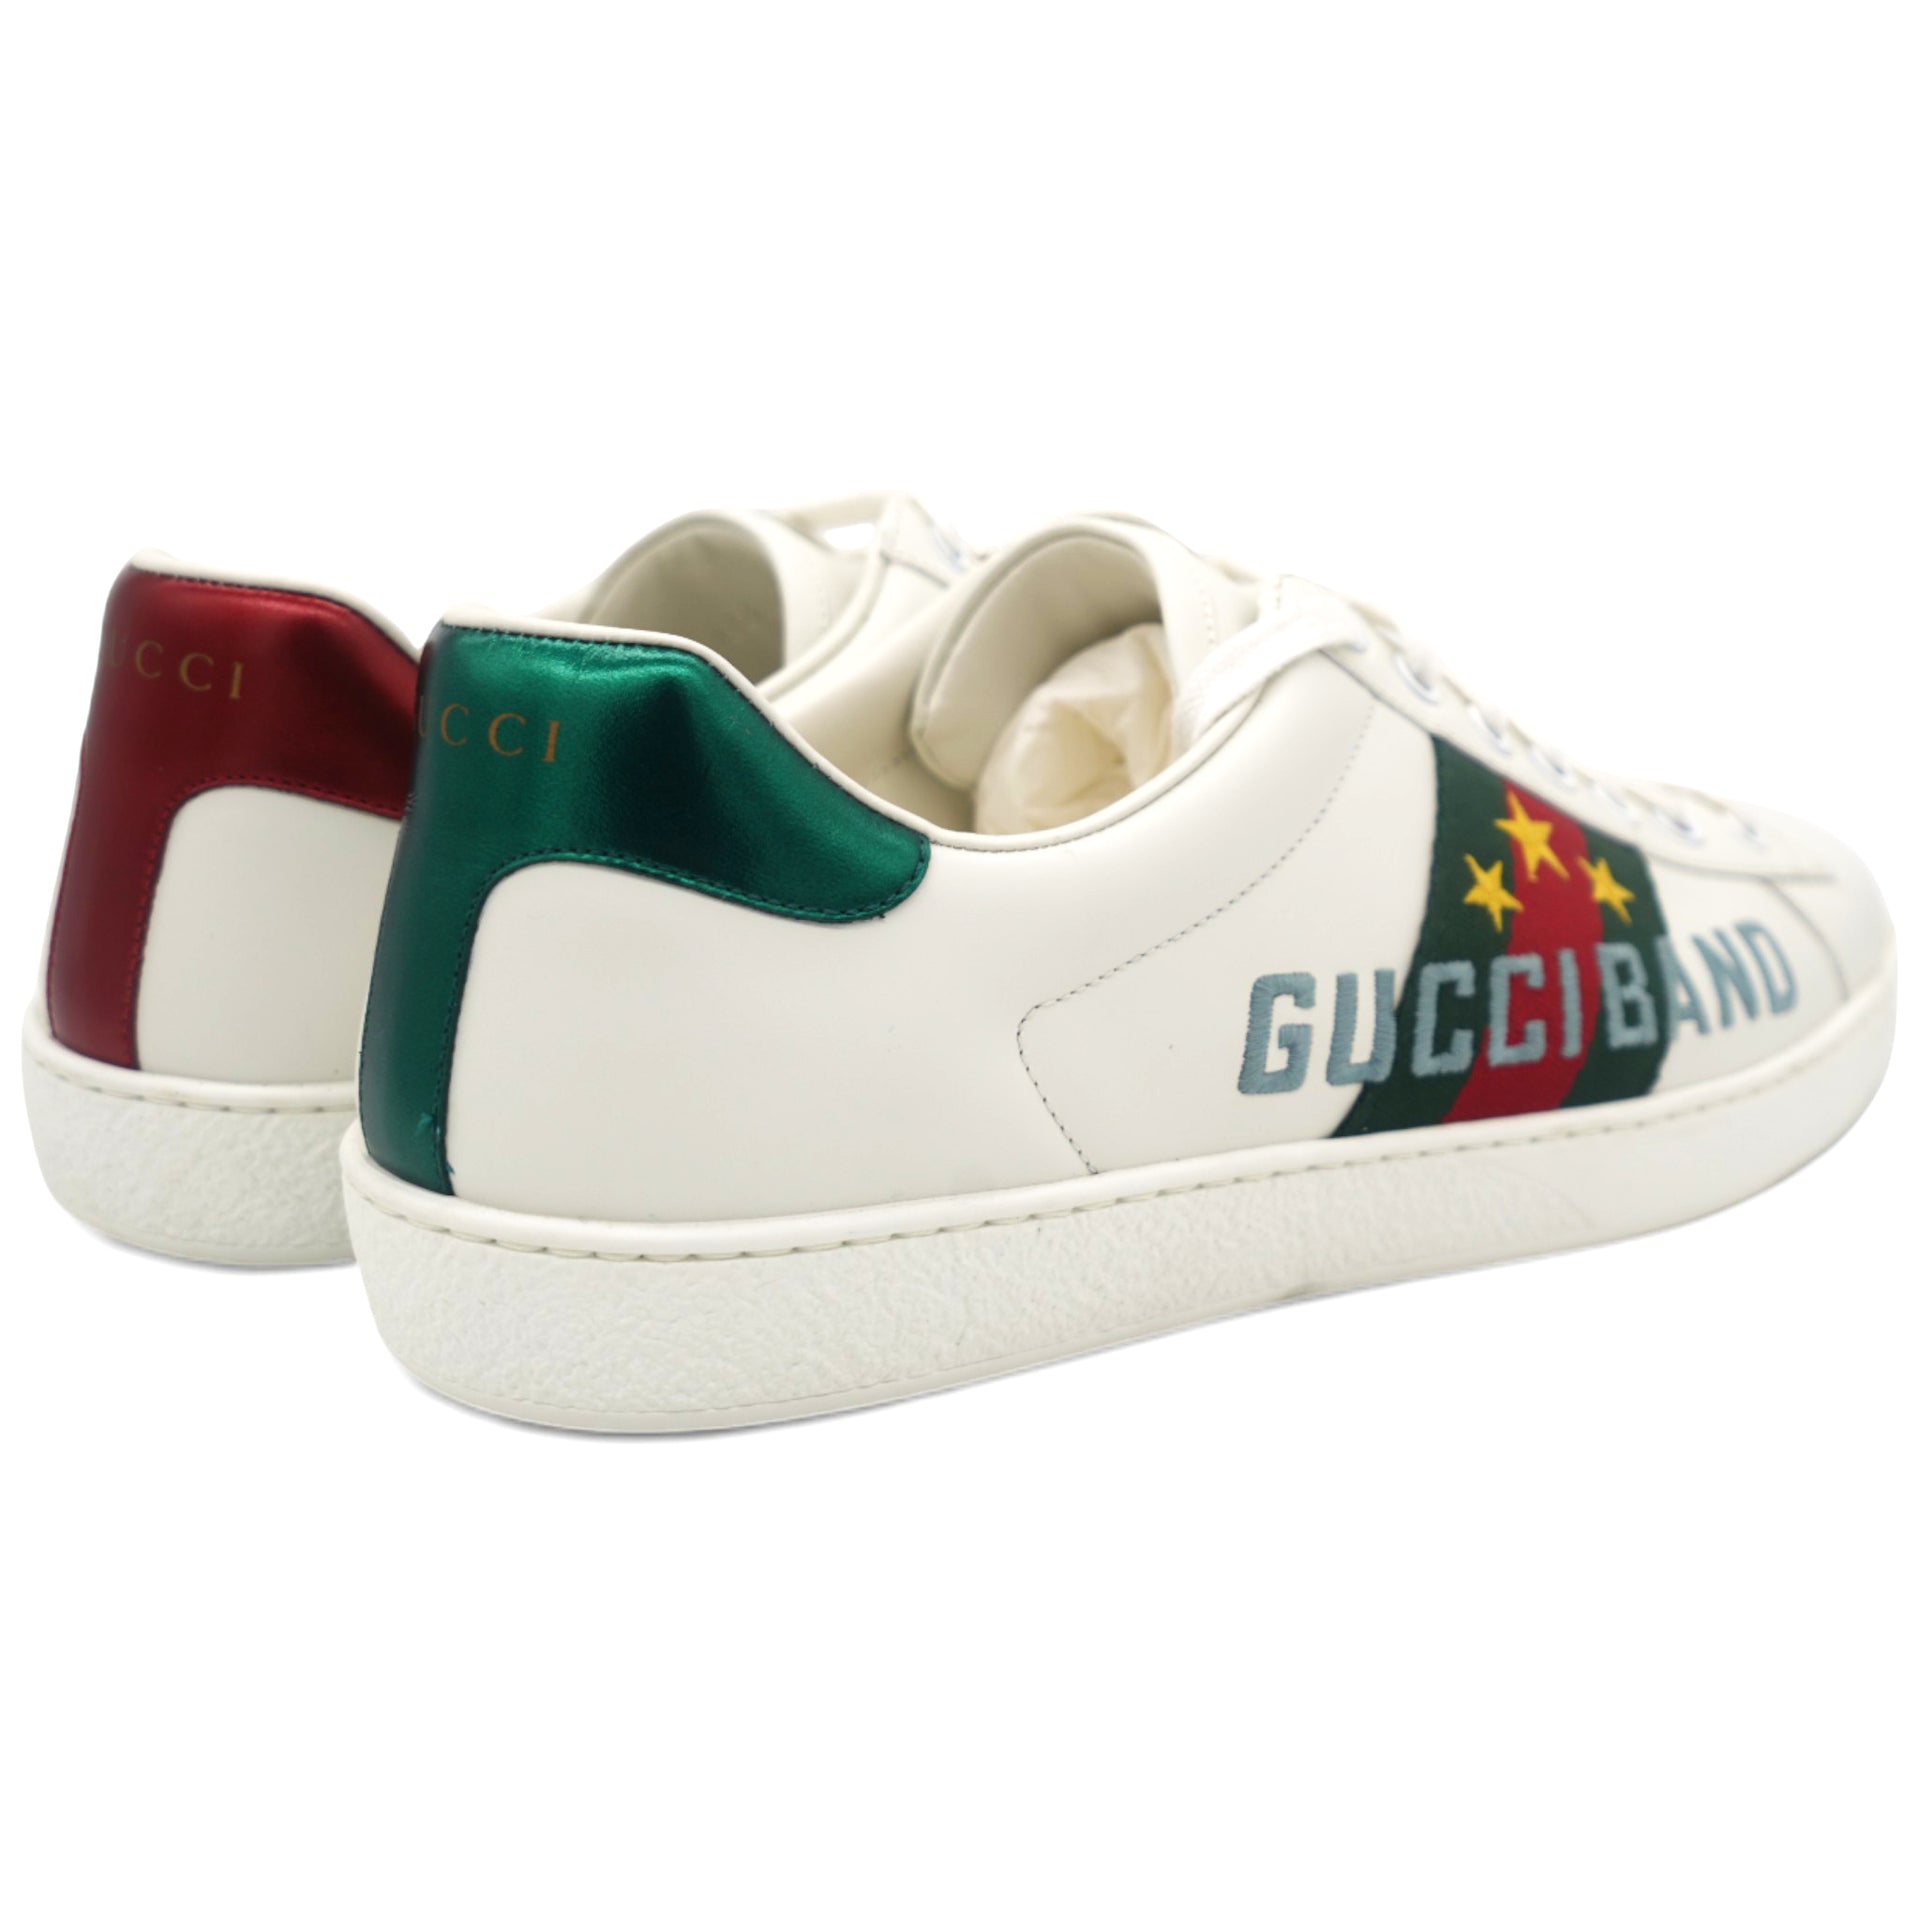 Calfskin Web Mens Gucci Band Ace Sneakers 9/43 White